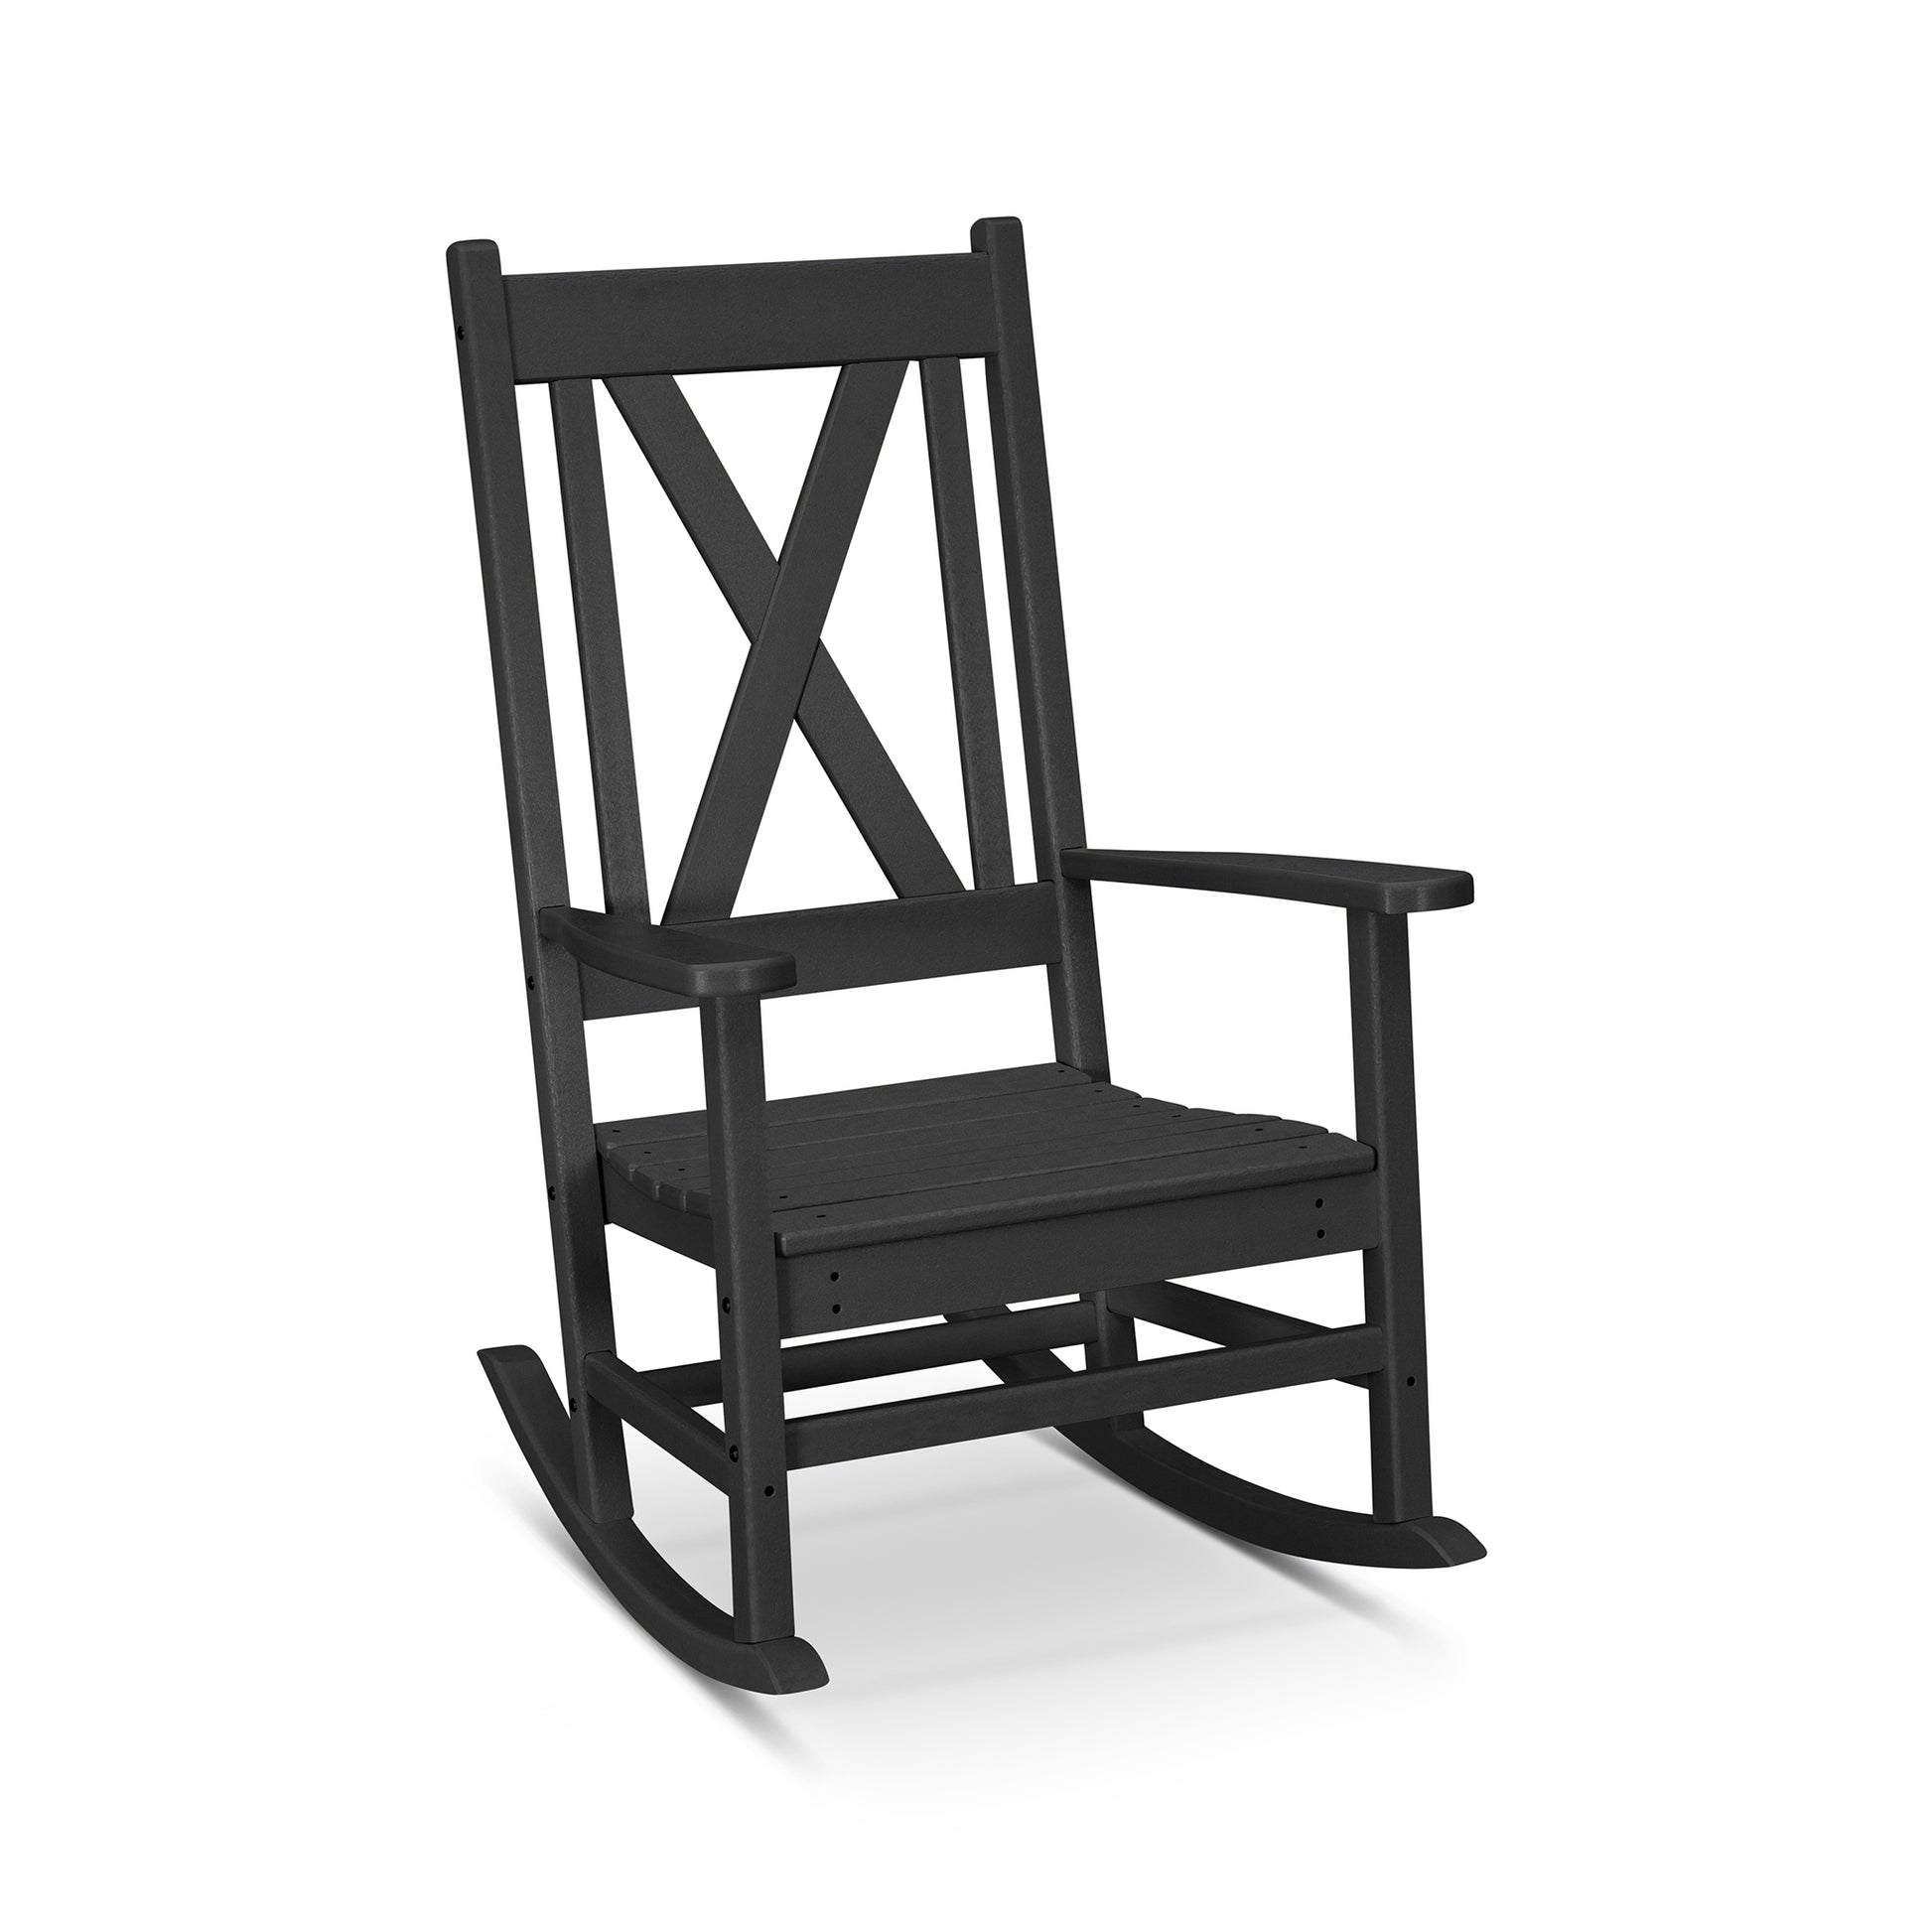 A black POLYWOOD Braxton Porch Rocking Chair with a slatted seat and backrest, featuring a cross-brace design on the back, isolated on a white background.